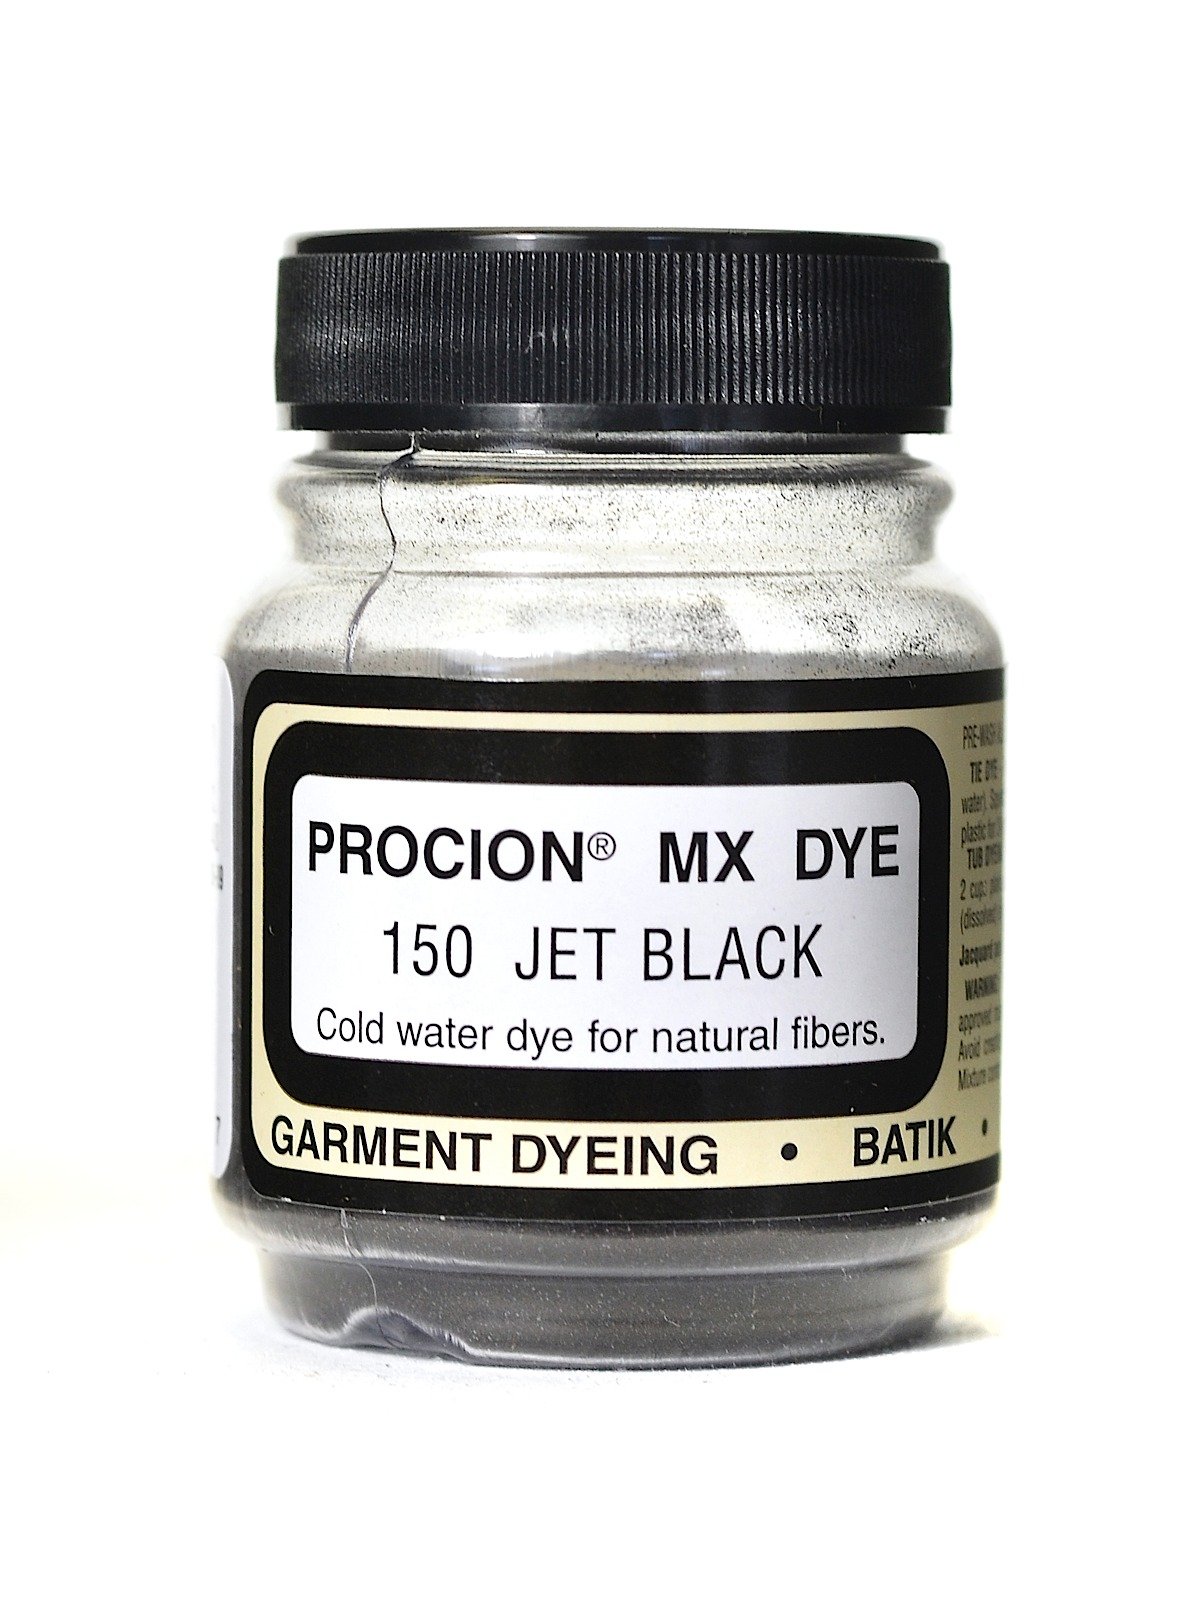 Black vs Jet Black Rit - is there a difference? : r/dyeing